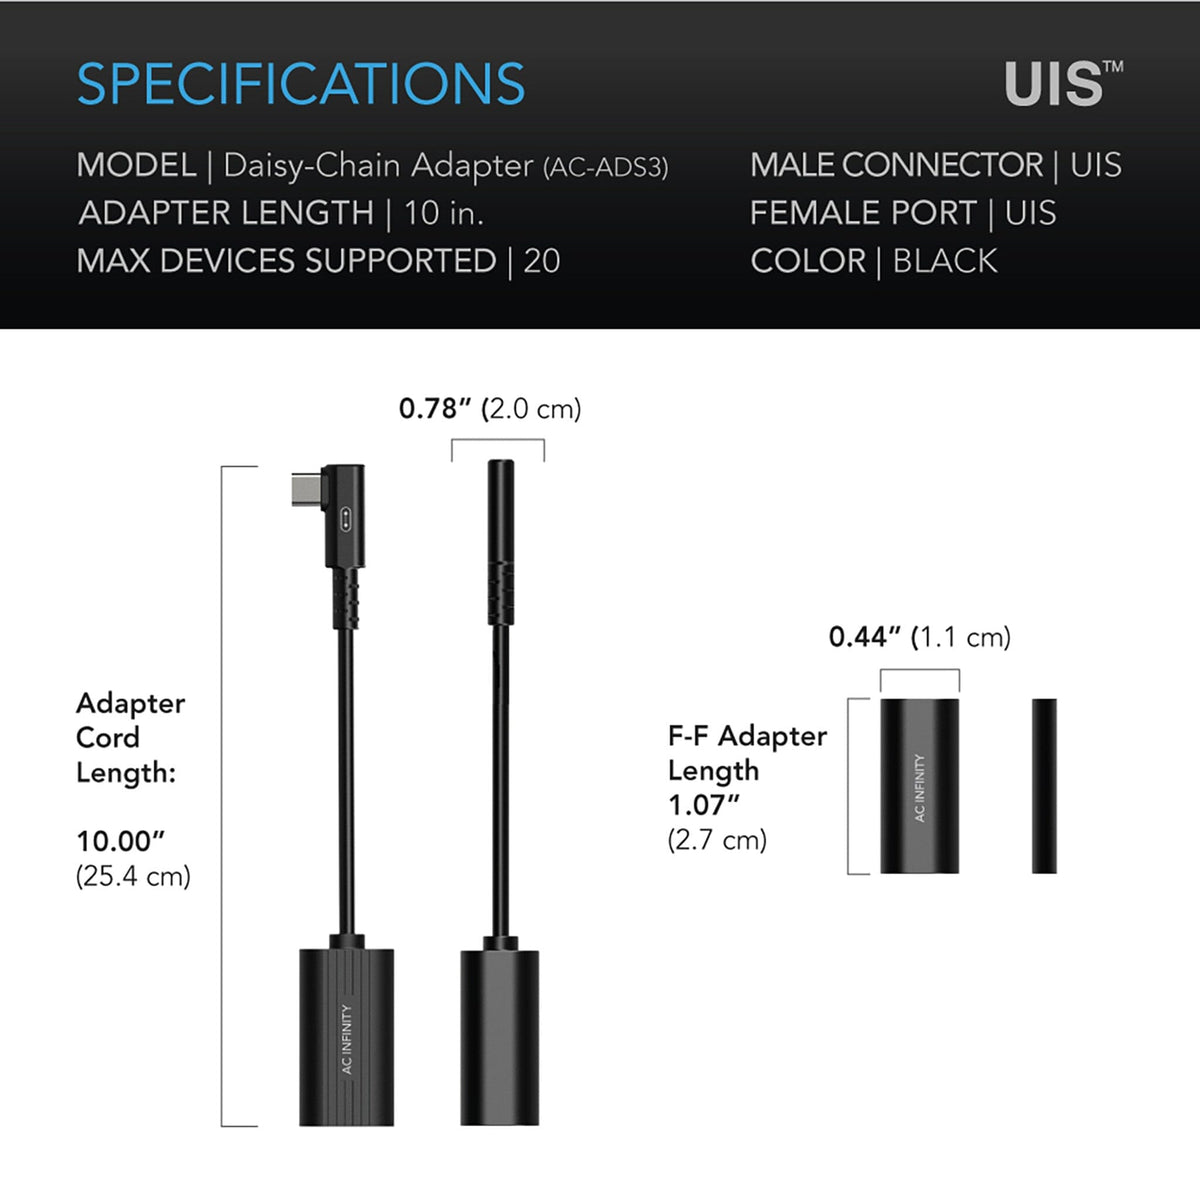 Specifications for Daisy-chain dongle adapter